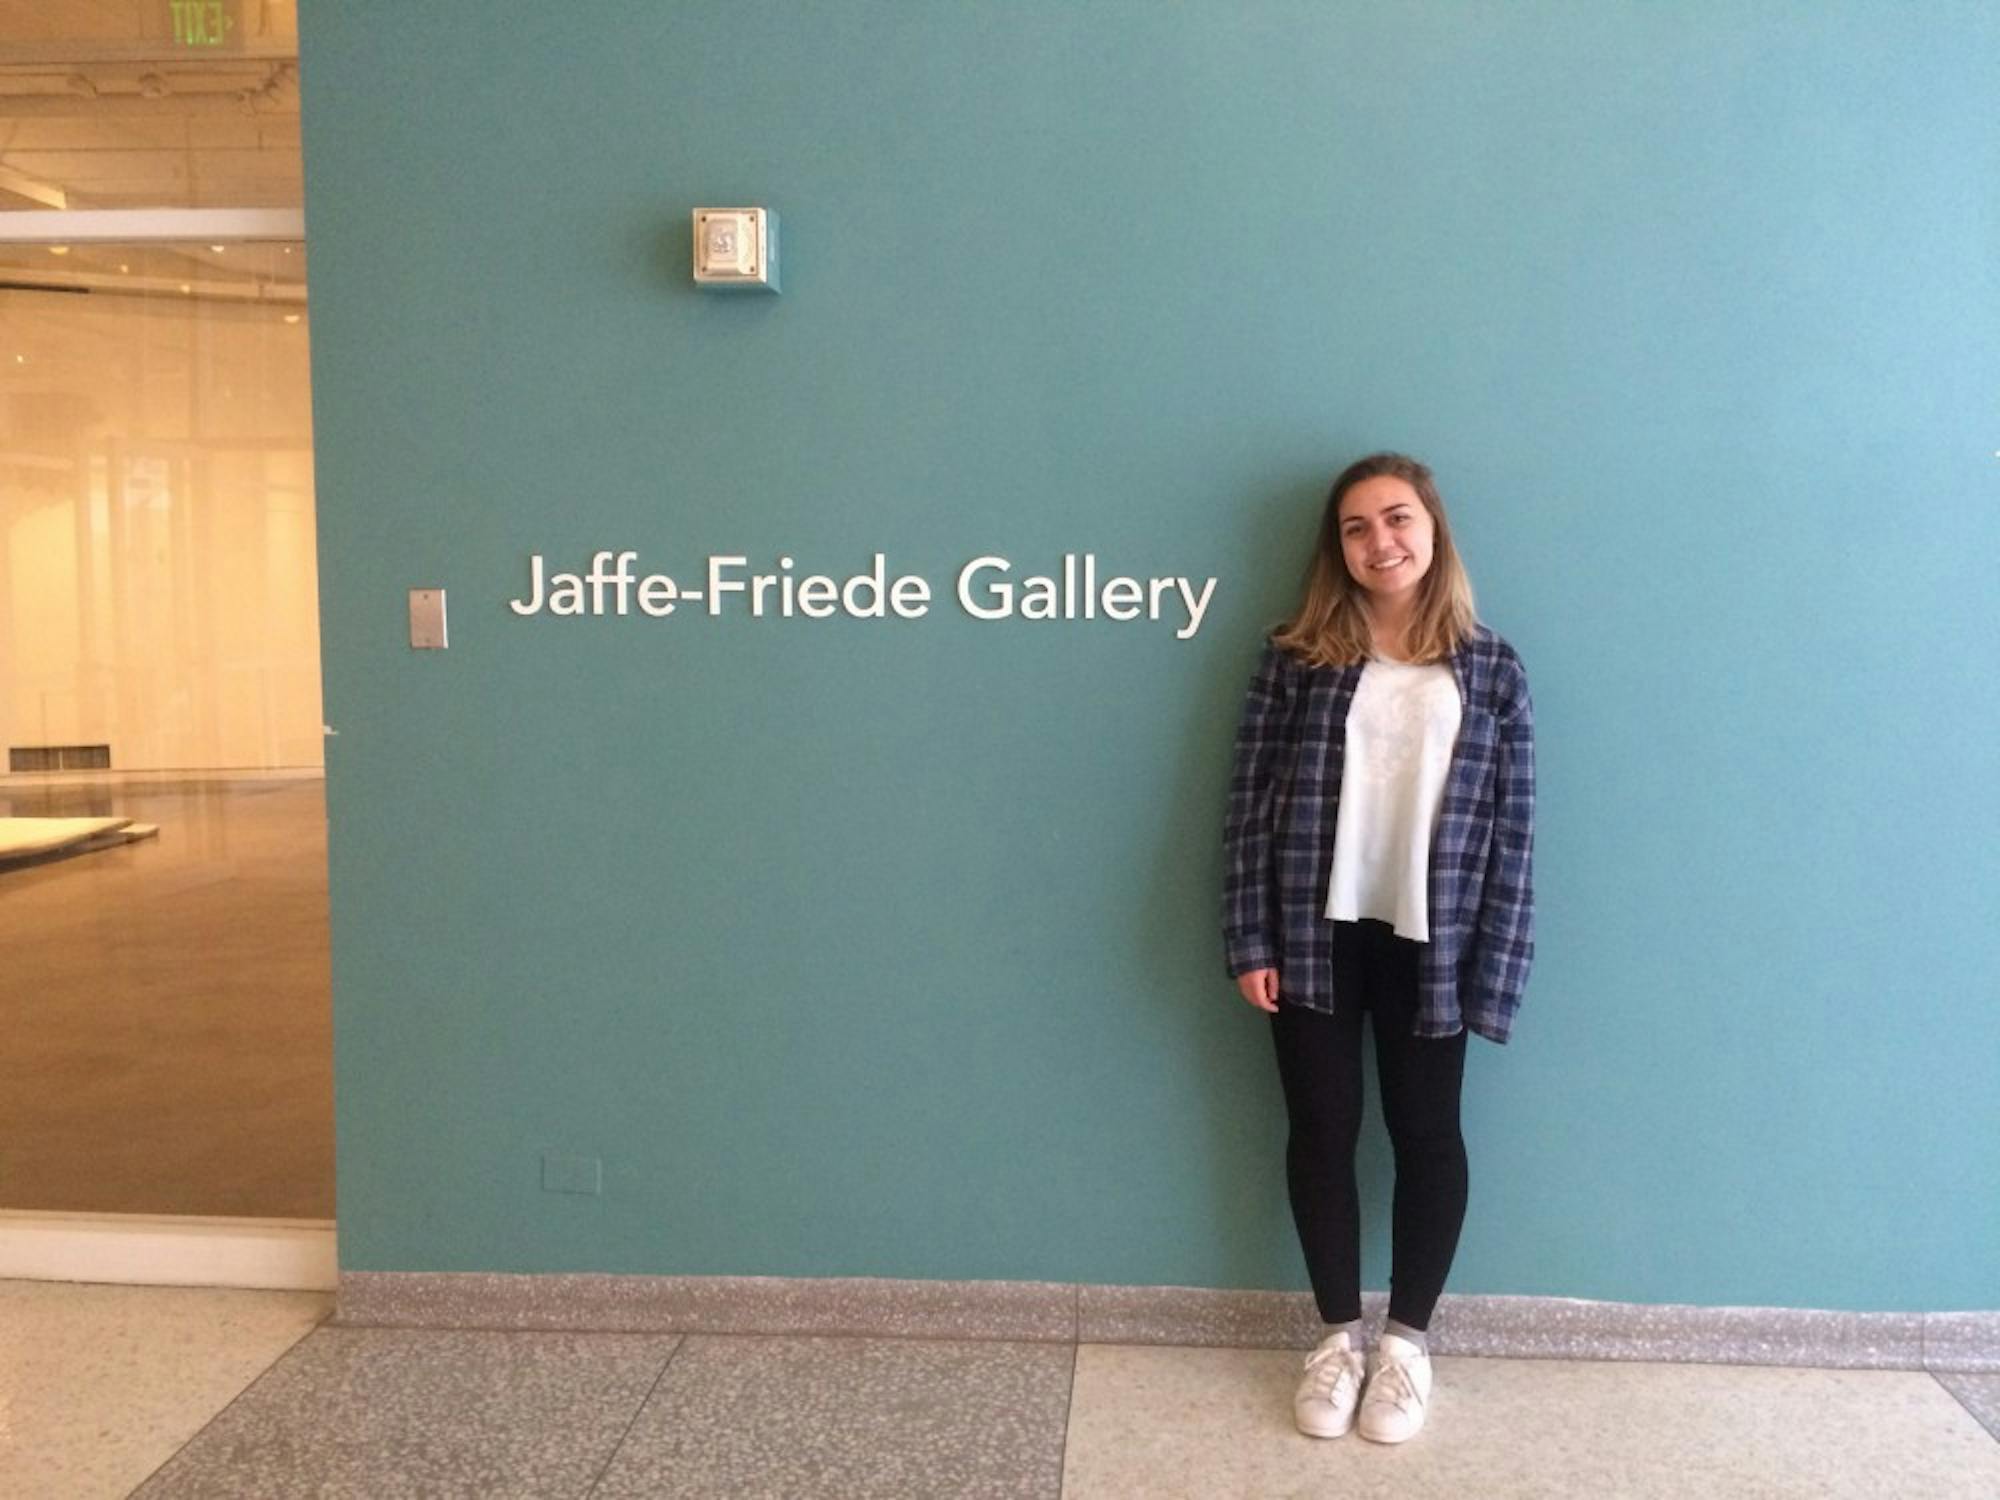 Madeline Killen talks about what it's like to be a gallery attendant.